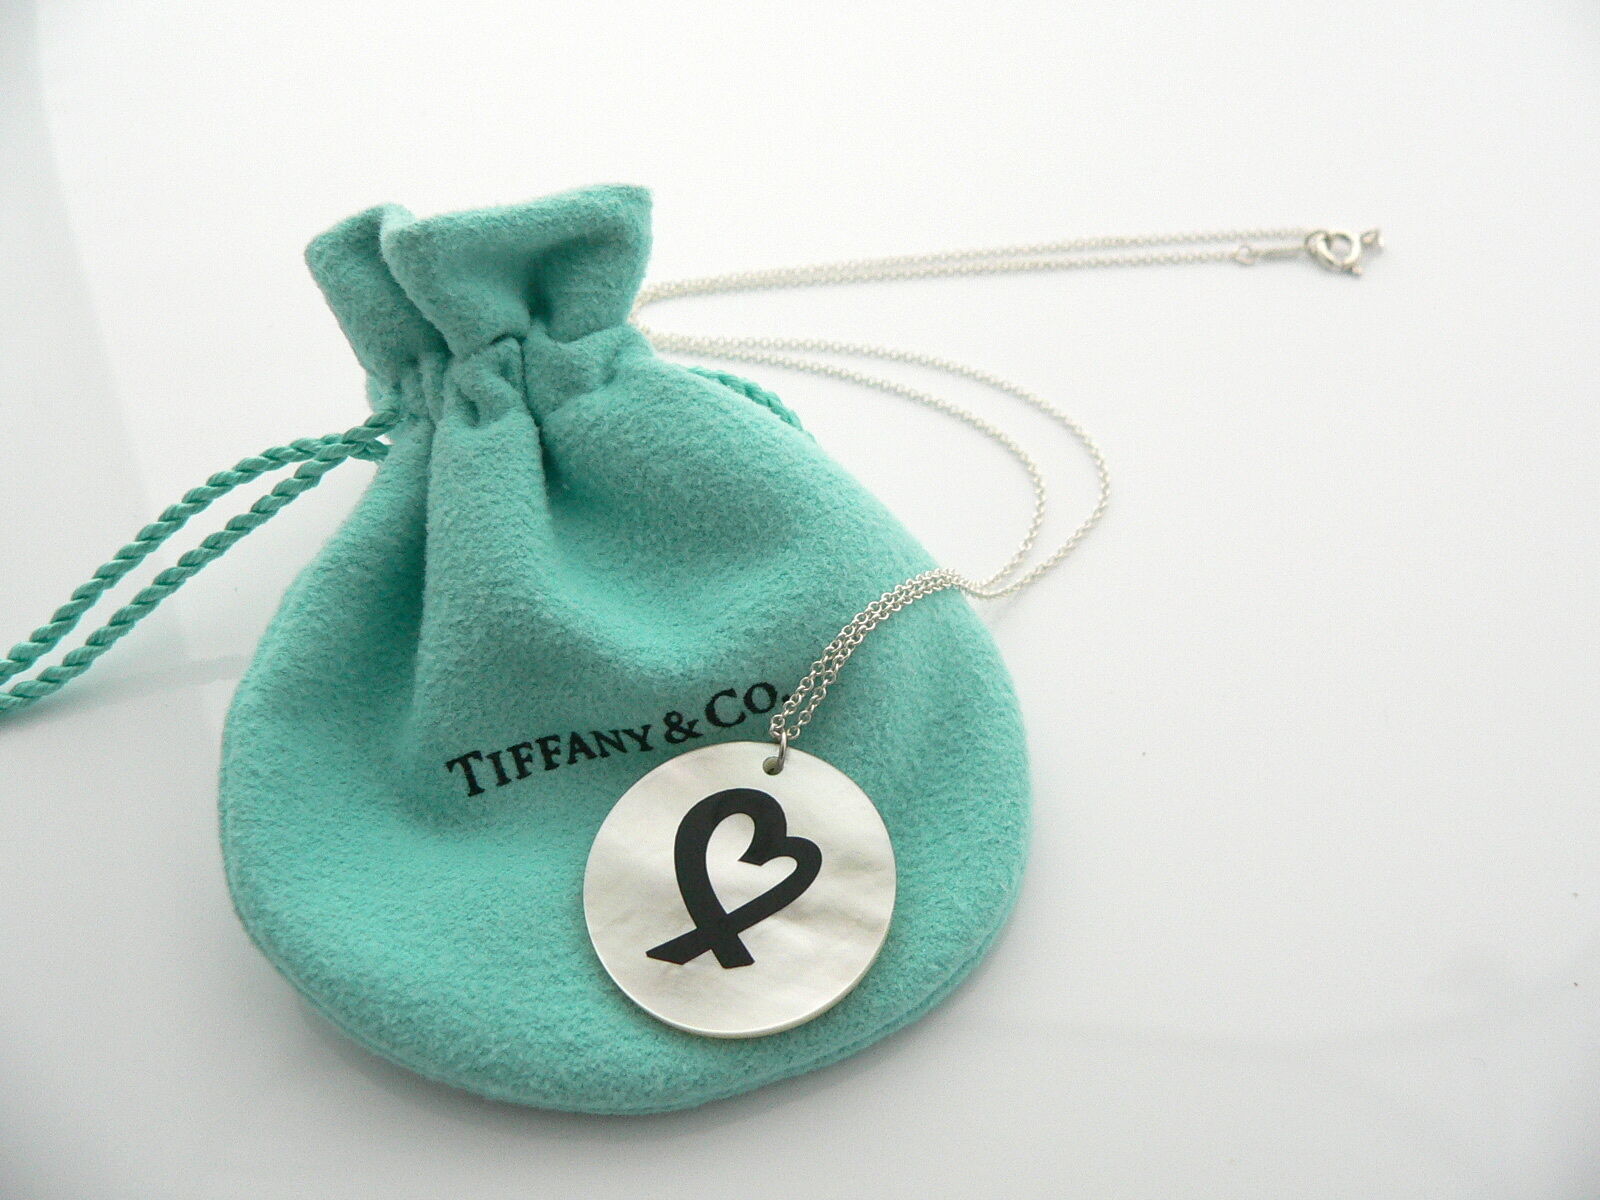 Tiffany & Co Mother of Pearl Loving Heart Necklace Pendant Gift Pouch  - $328.00